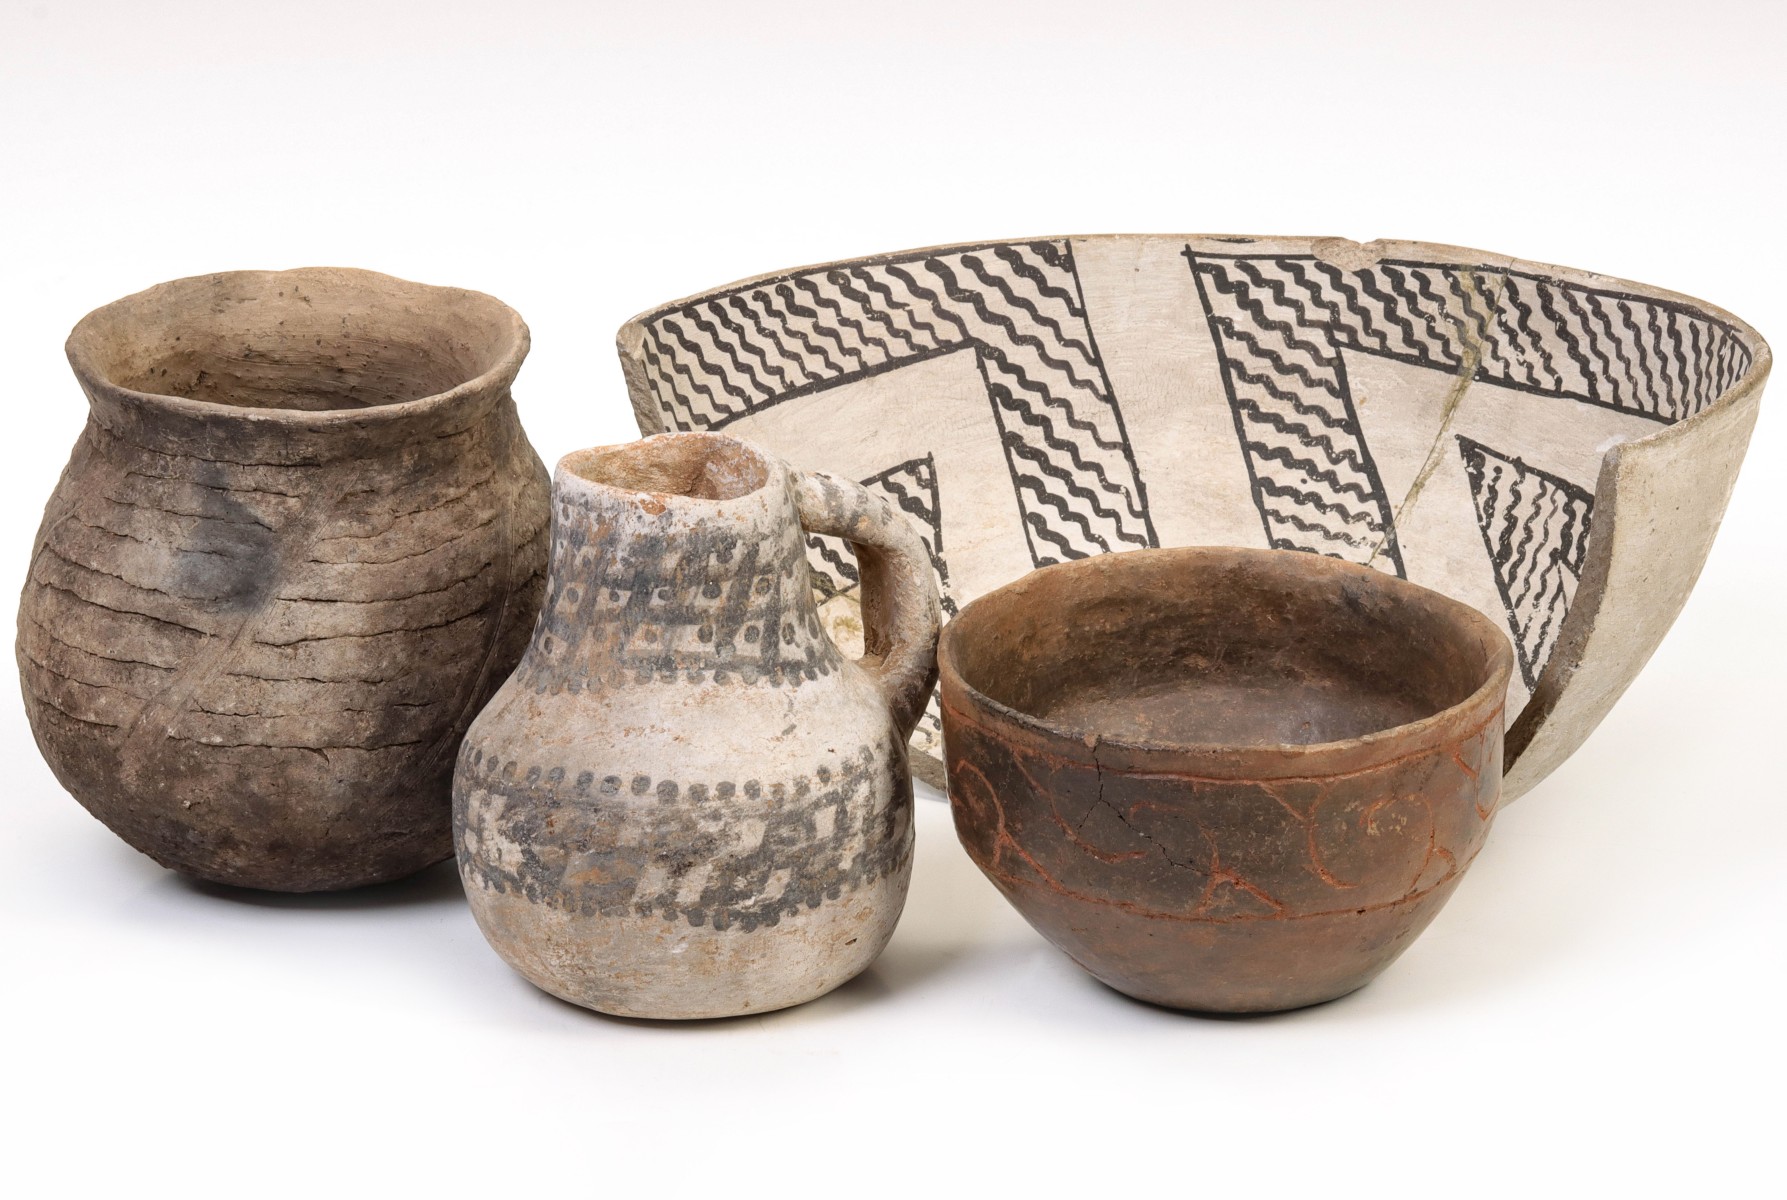 ANASAZI AND OTHER PRE-HISTORIC PERIOD POTTERY EXAMPLES